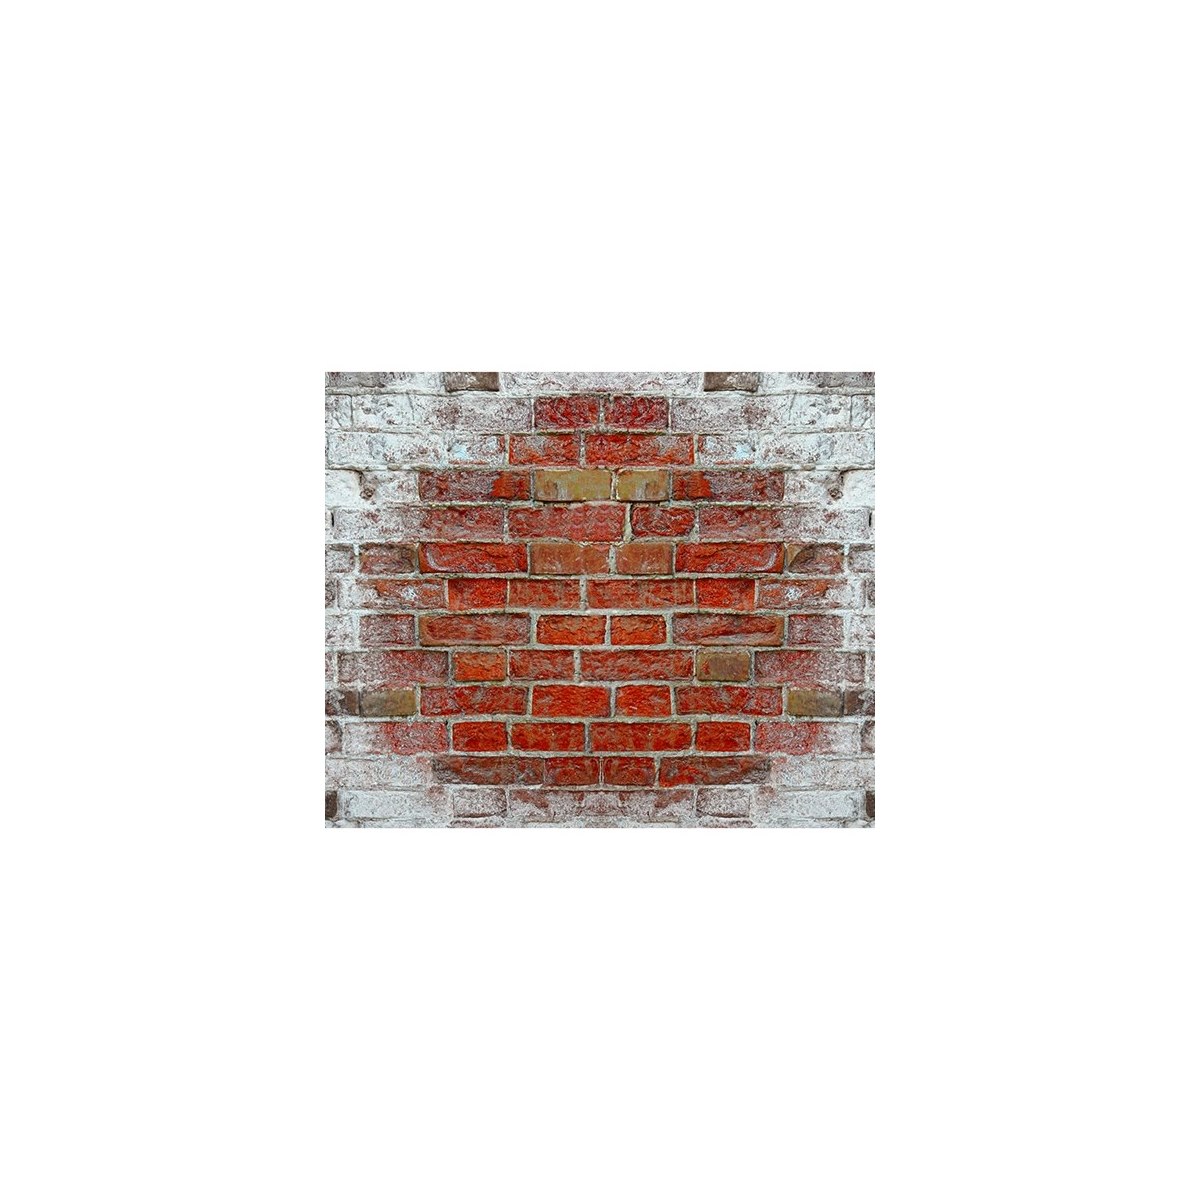 How to Remove Efflourescence from Brickwork